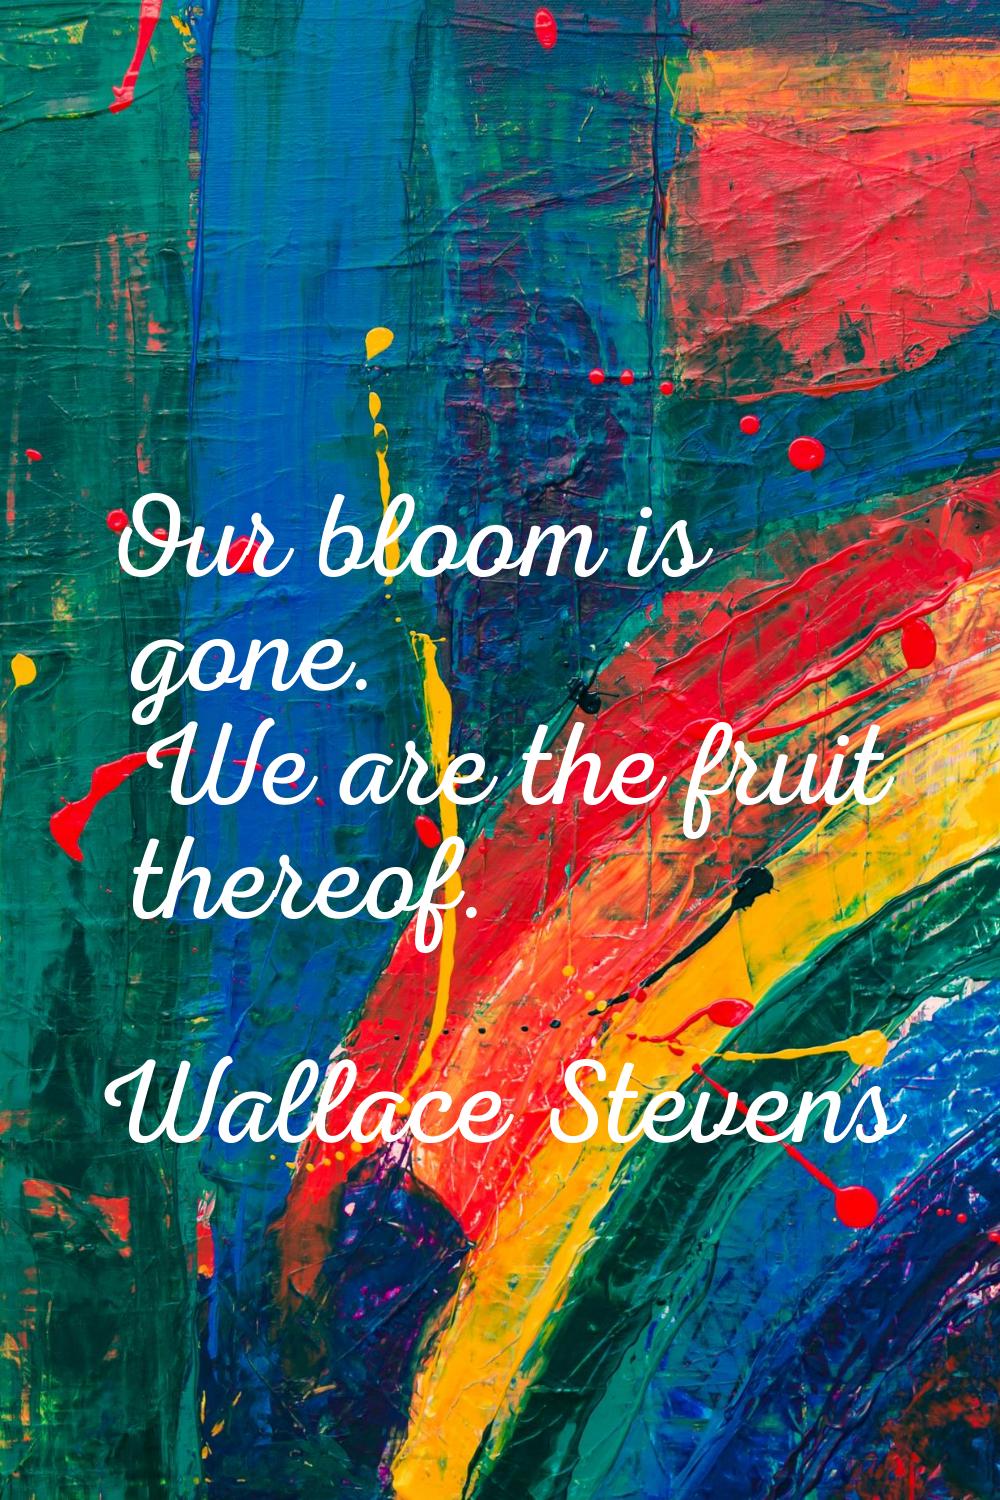 Our bloom is gone. We are the fruit thereof.